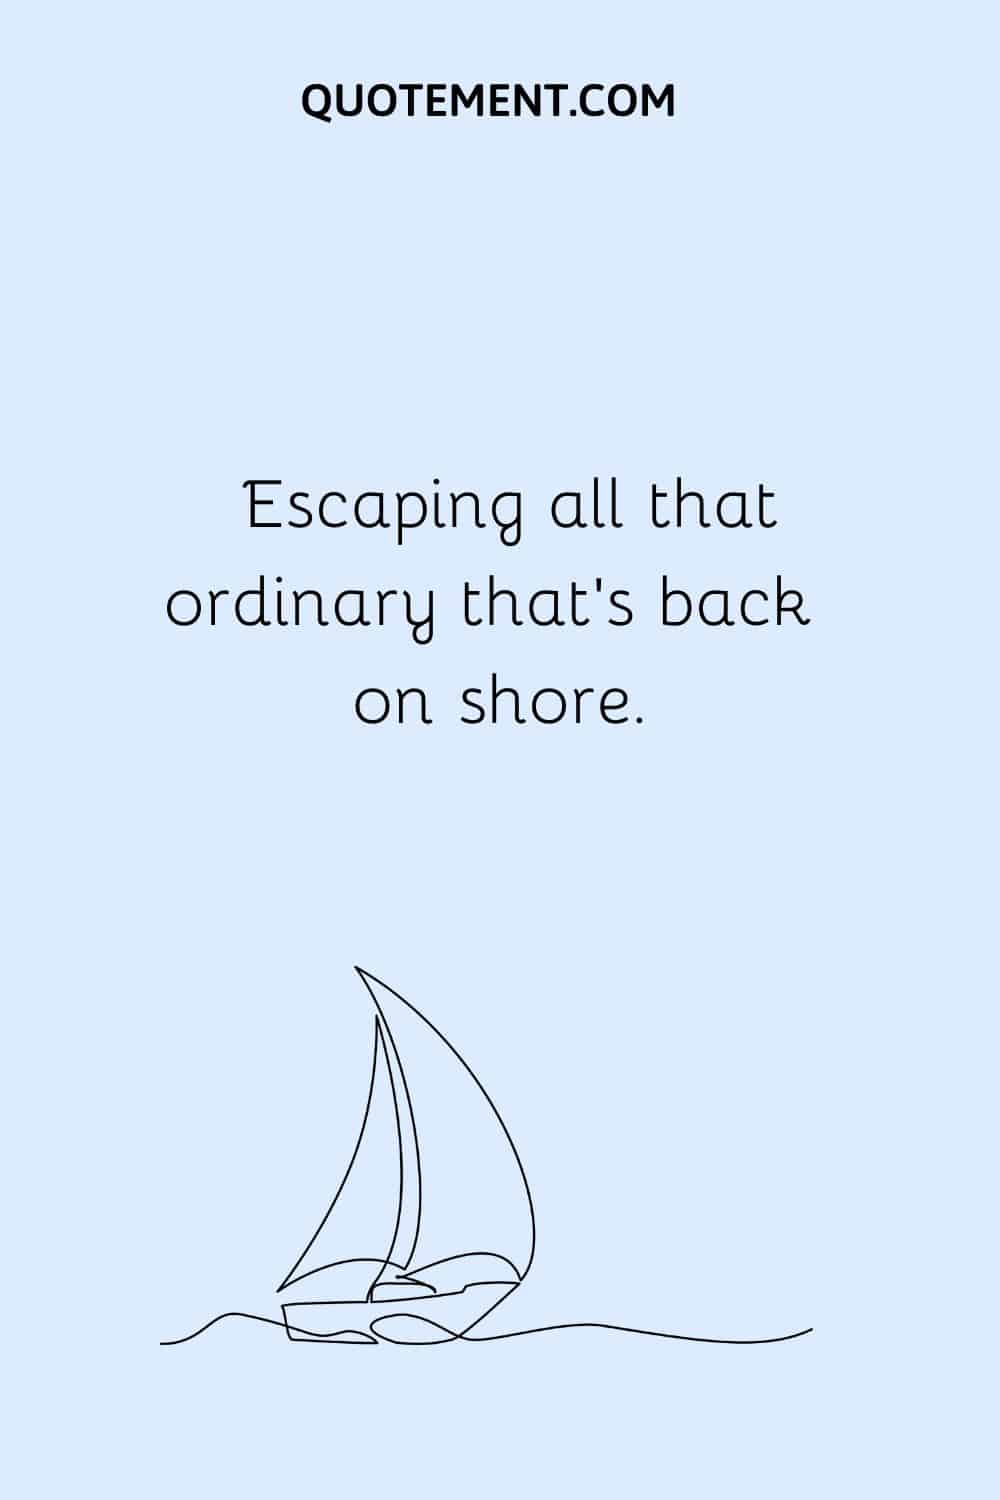 Escaping all that ordinary that's back on shore